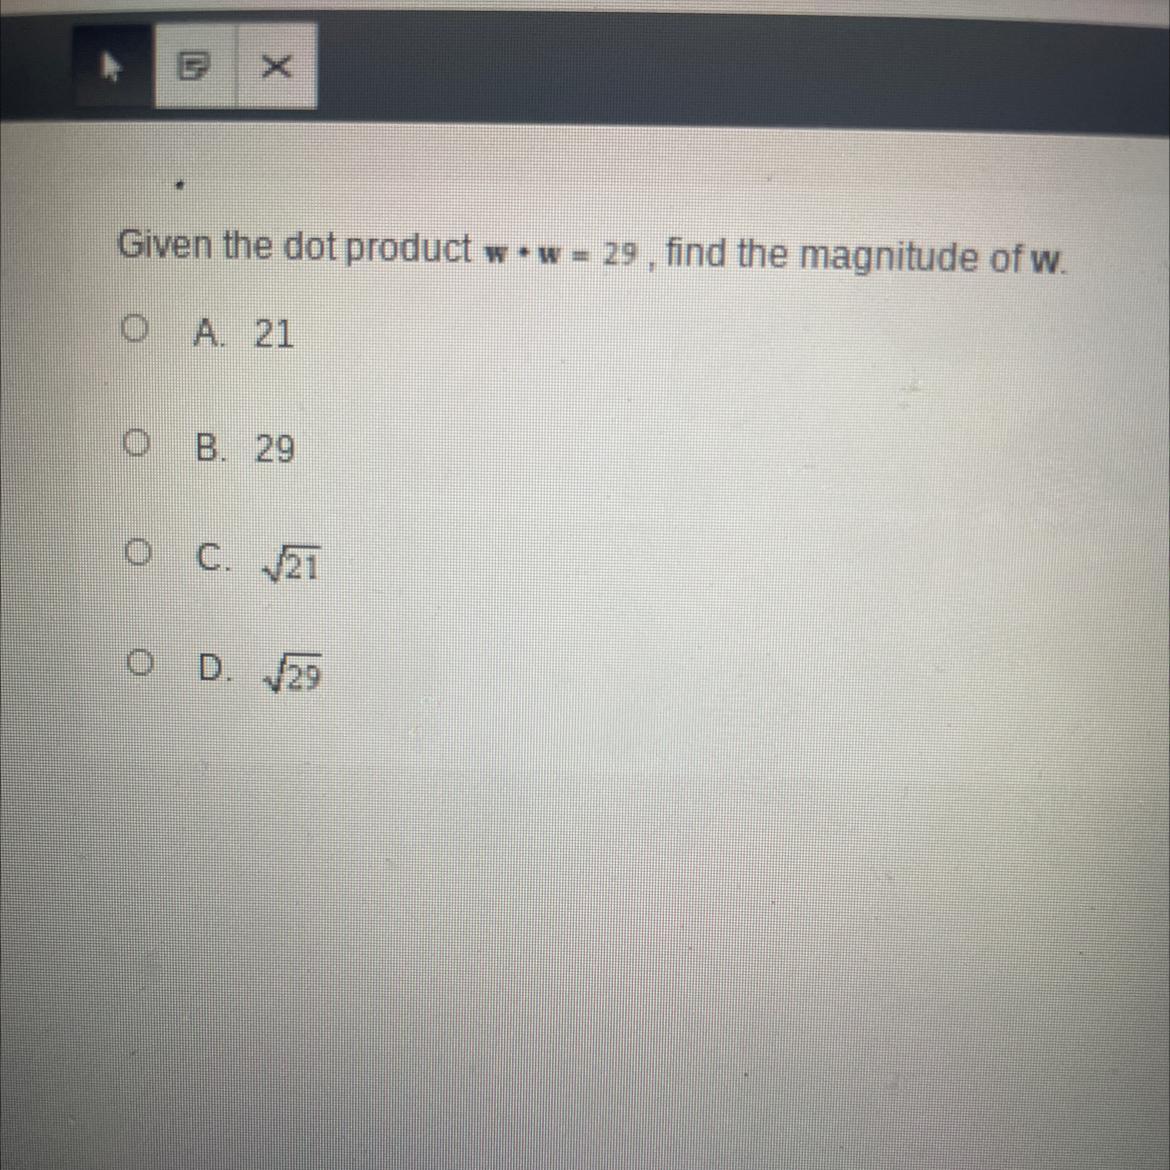 Given The Dot Product Ww = 29, Find The Magnitude Of W.